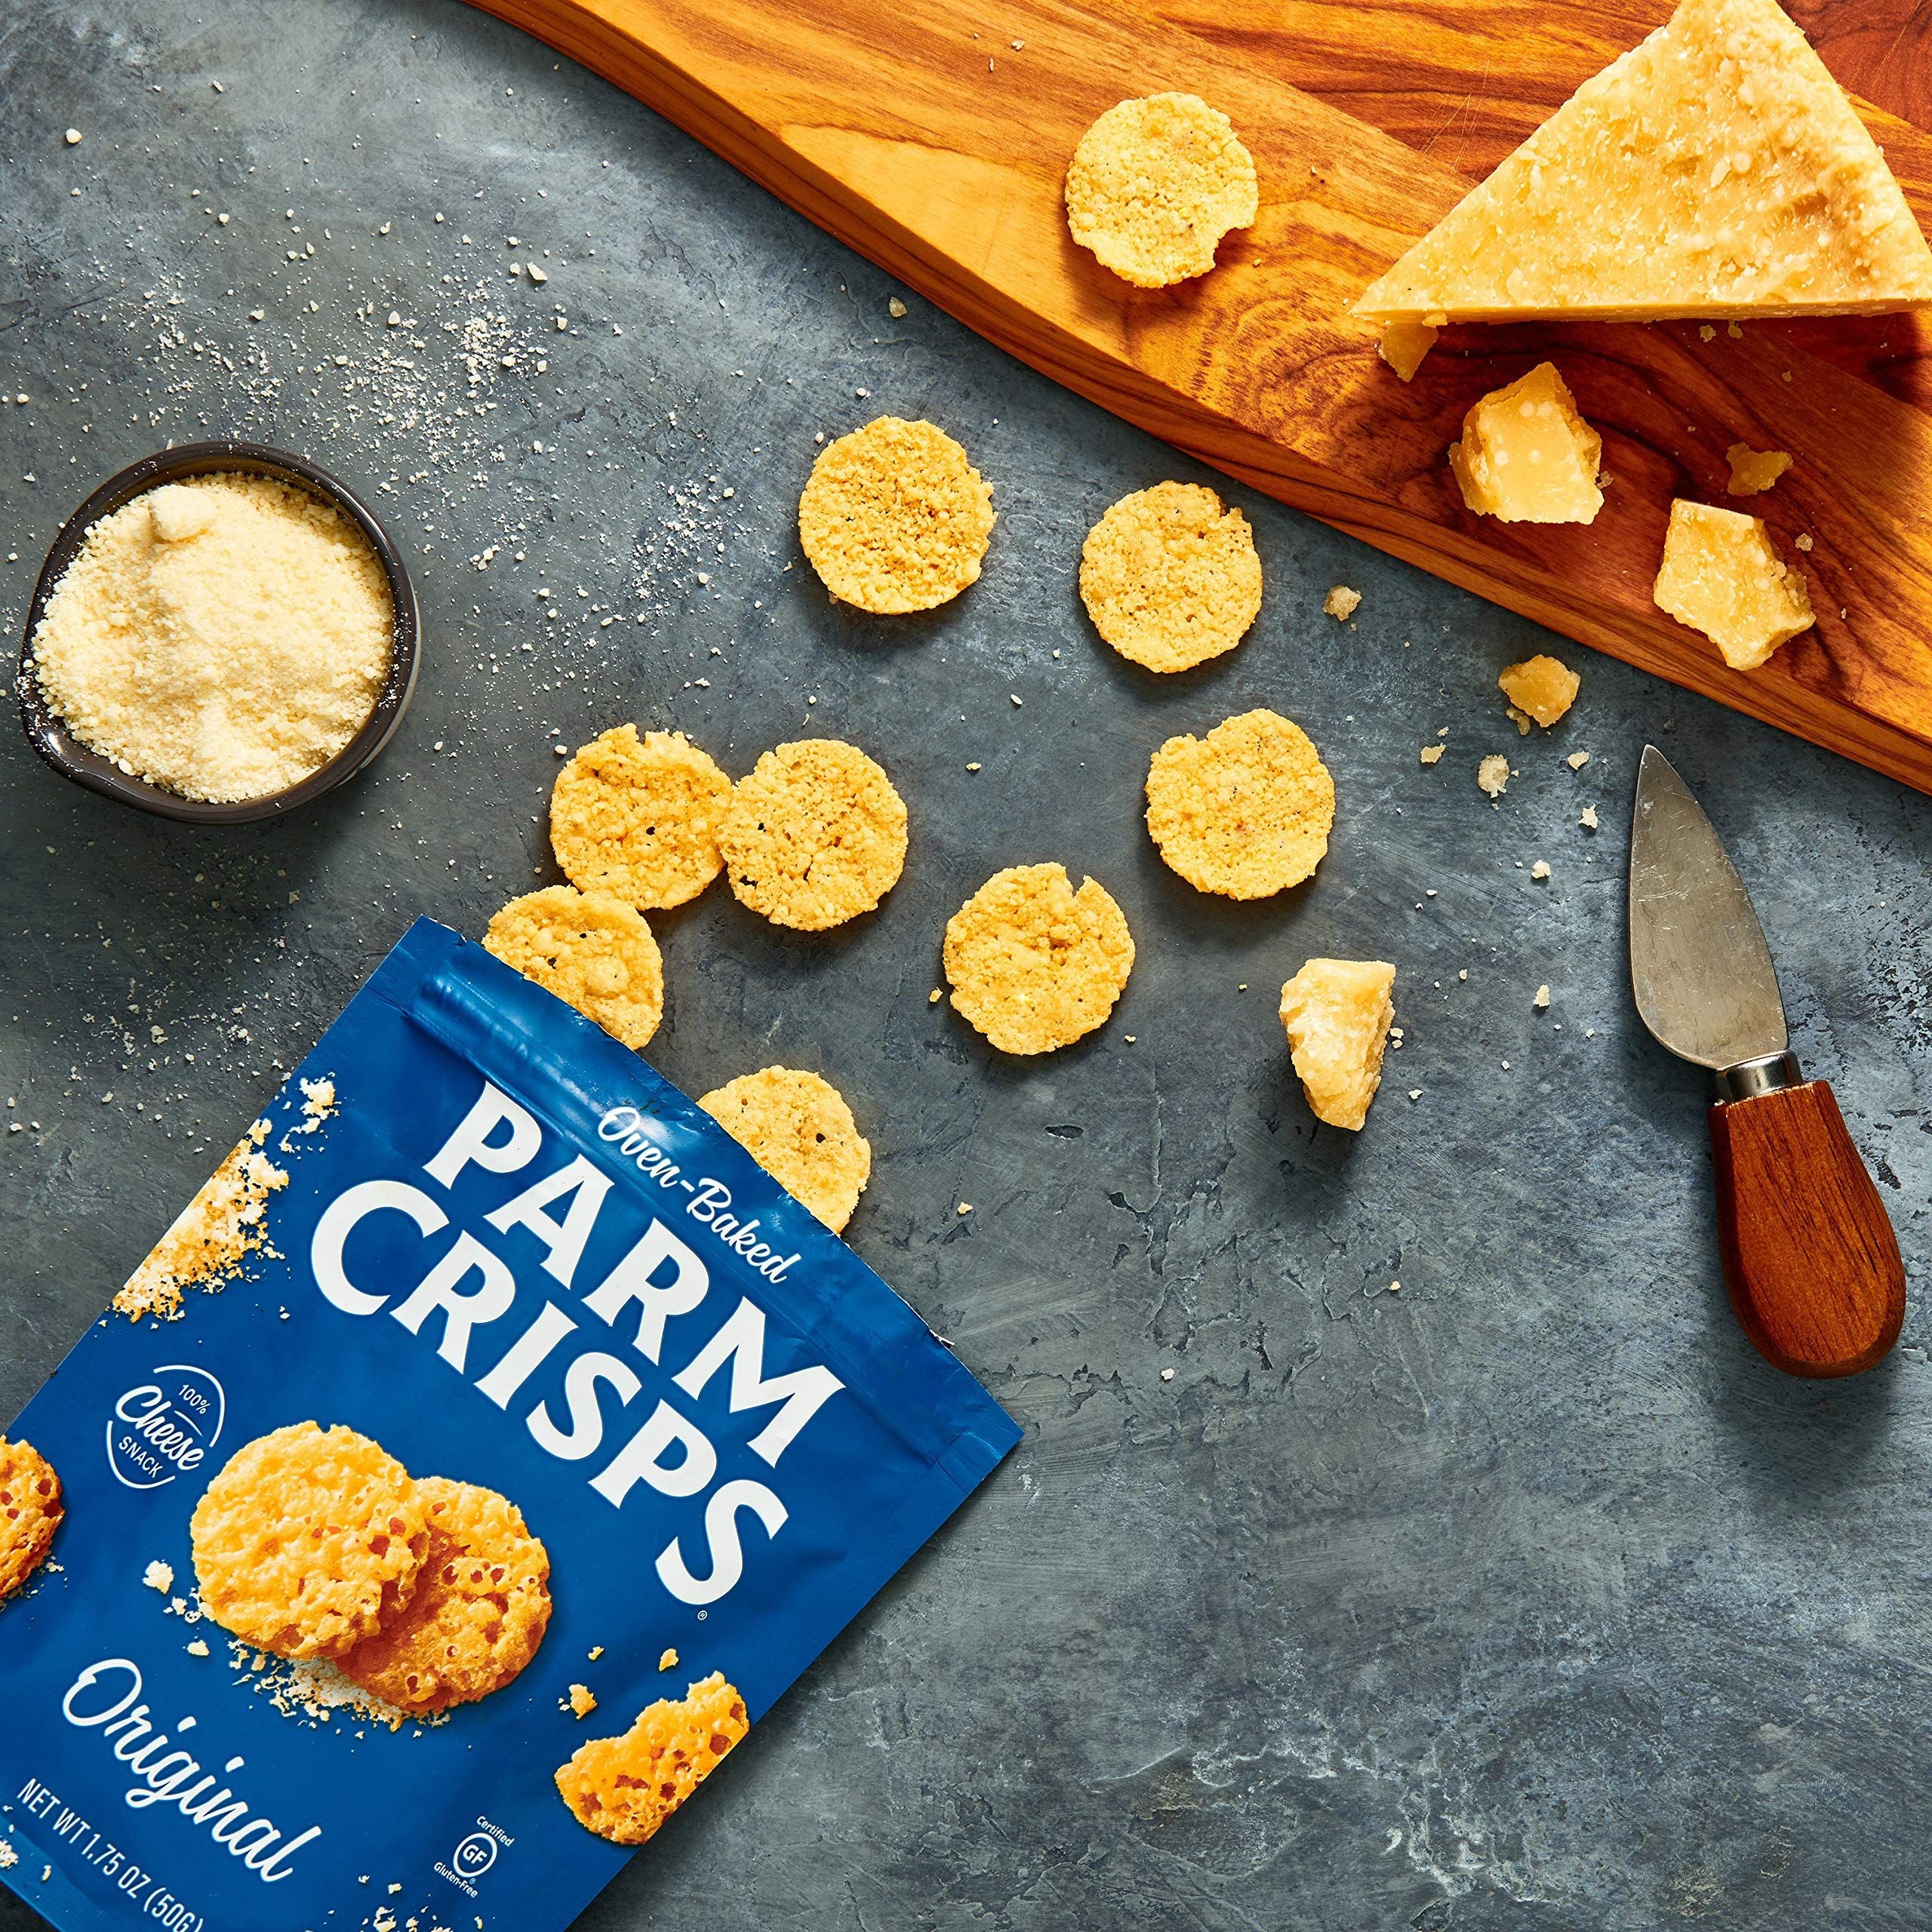 ParmCrisps - Original Cheese Parm Crisps, Made Simply with 100% REAL Parmesan Cheese, Made Simply with 100% REAL Cheese | Healthy Keto On-the-Go Snacks, Low Carb, High Protein, Gluten Free, Oven Baked, Keto-Friendly | 0.63oz (Pack of 24)